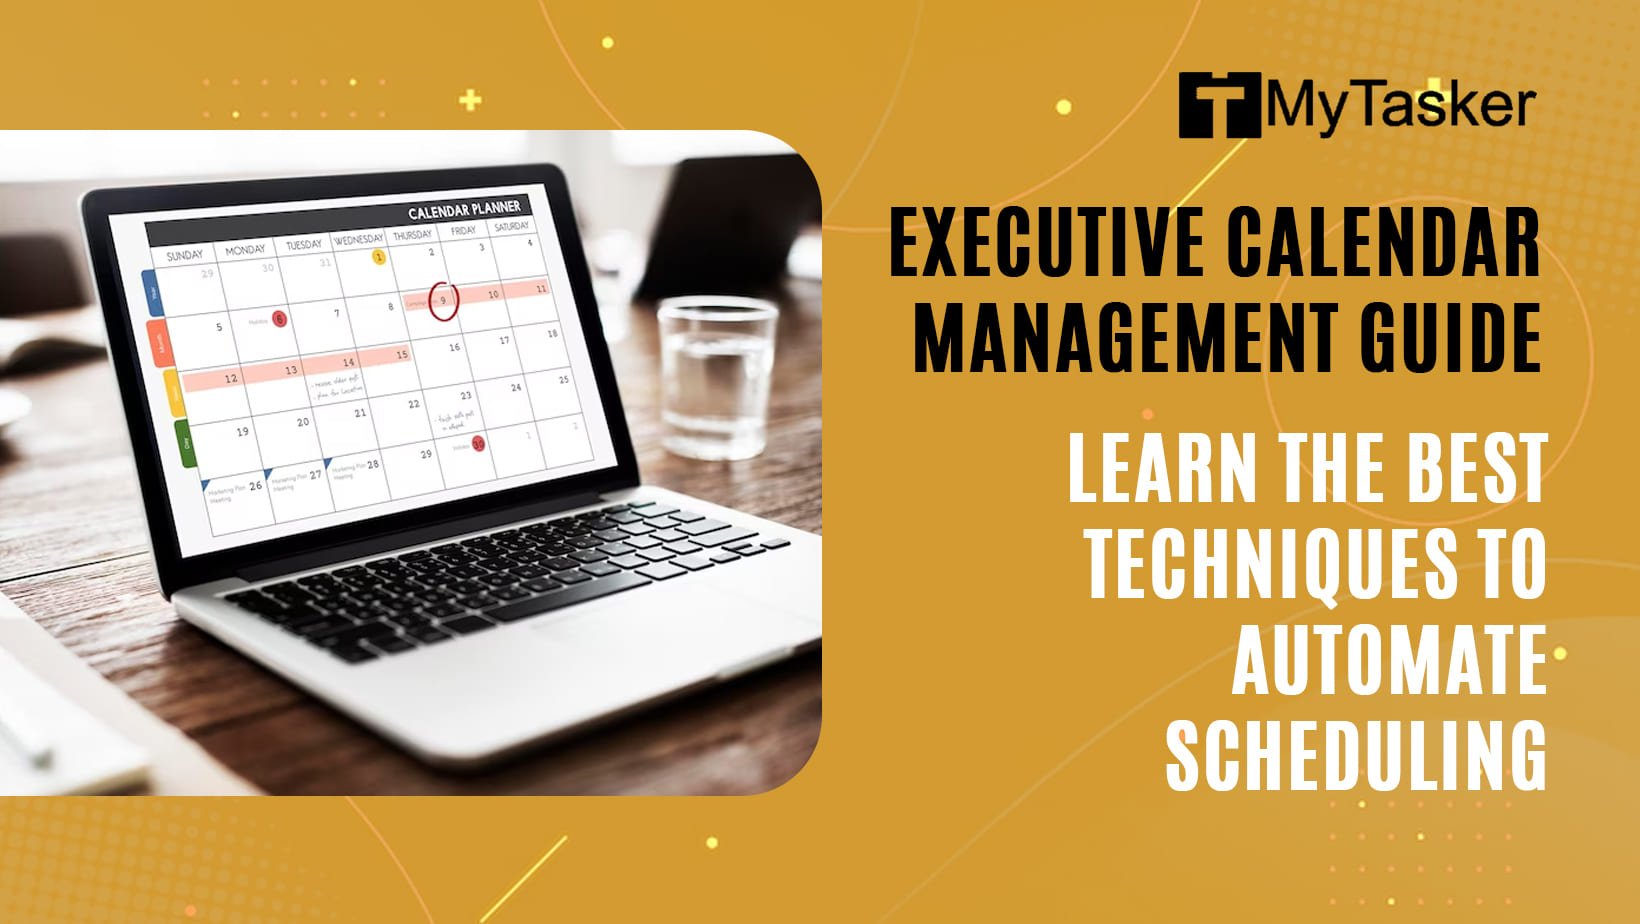 Executive Calendar Management Guide: Learn the Best Techniques To Automate Scheduling